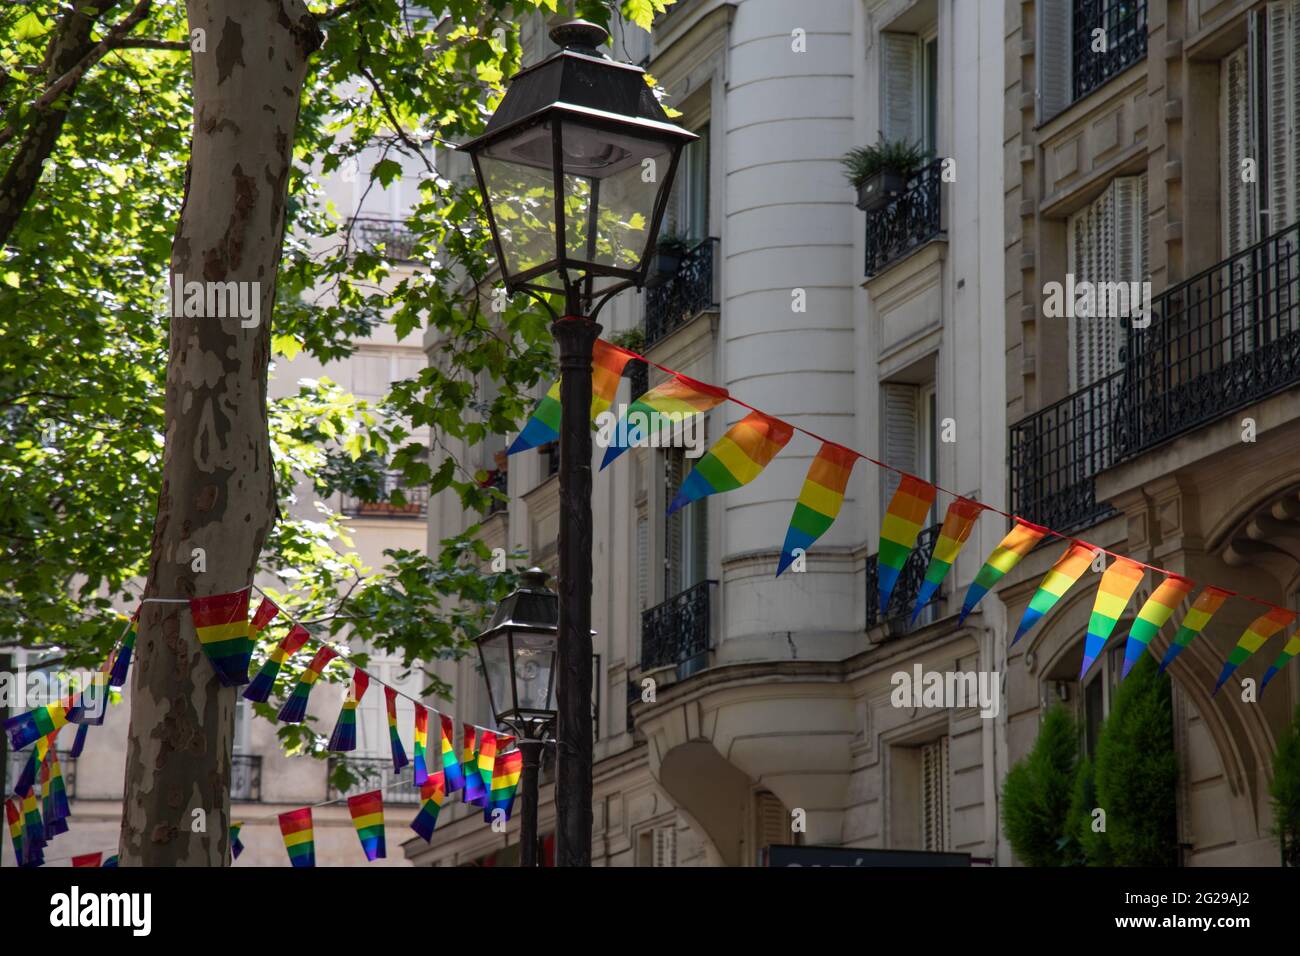 Decoration of triangle shape banners in colors of Lgbtq flags hanging between vintage lantern streetlights and ornate stone house with balconies. Gay Stock Photo